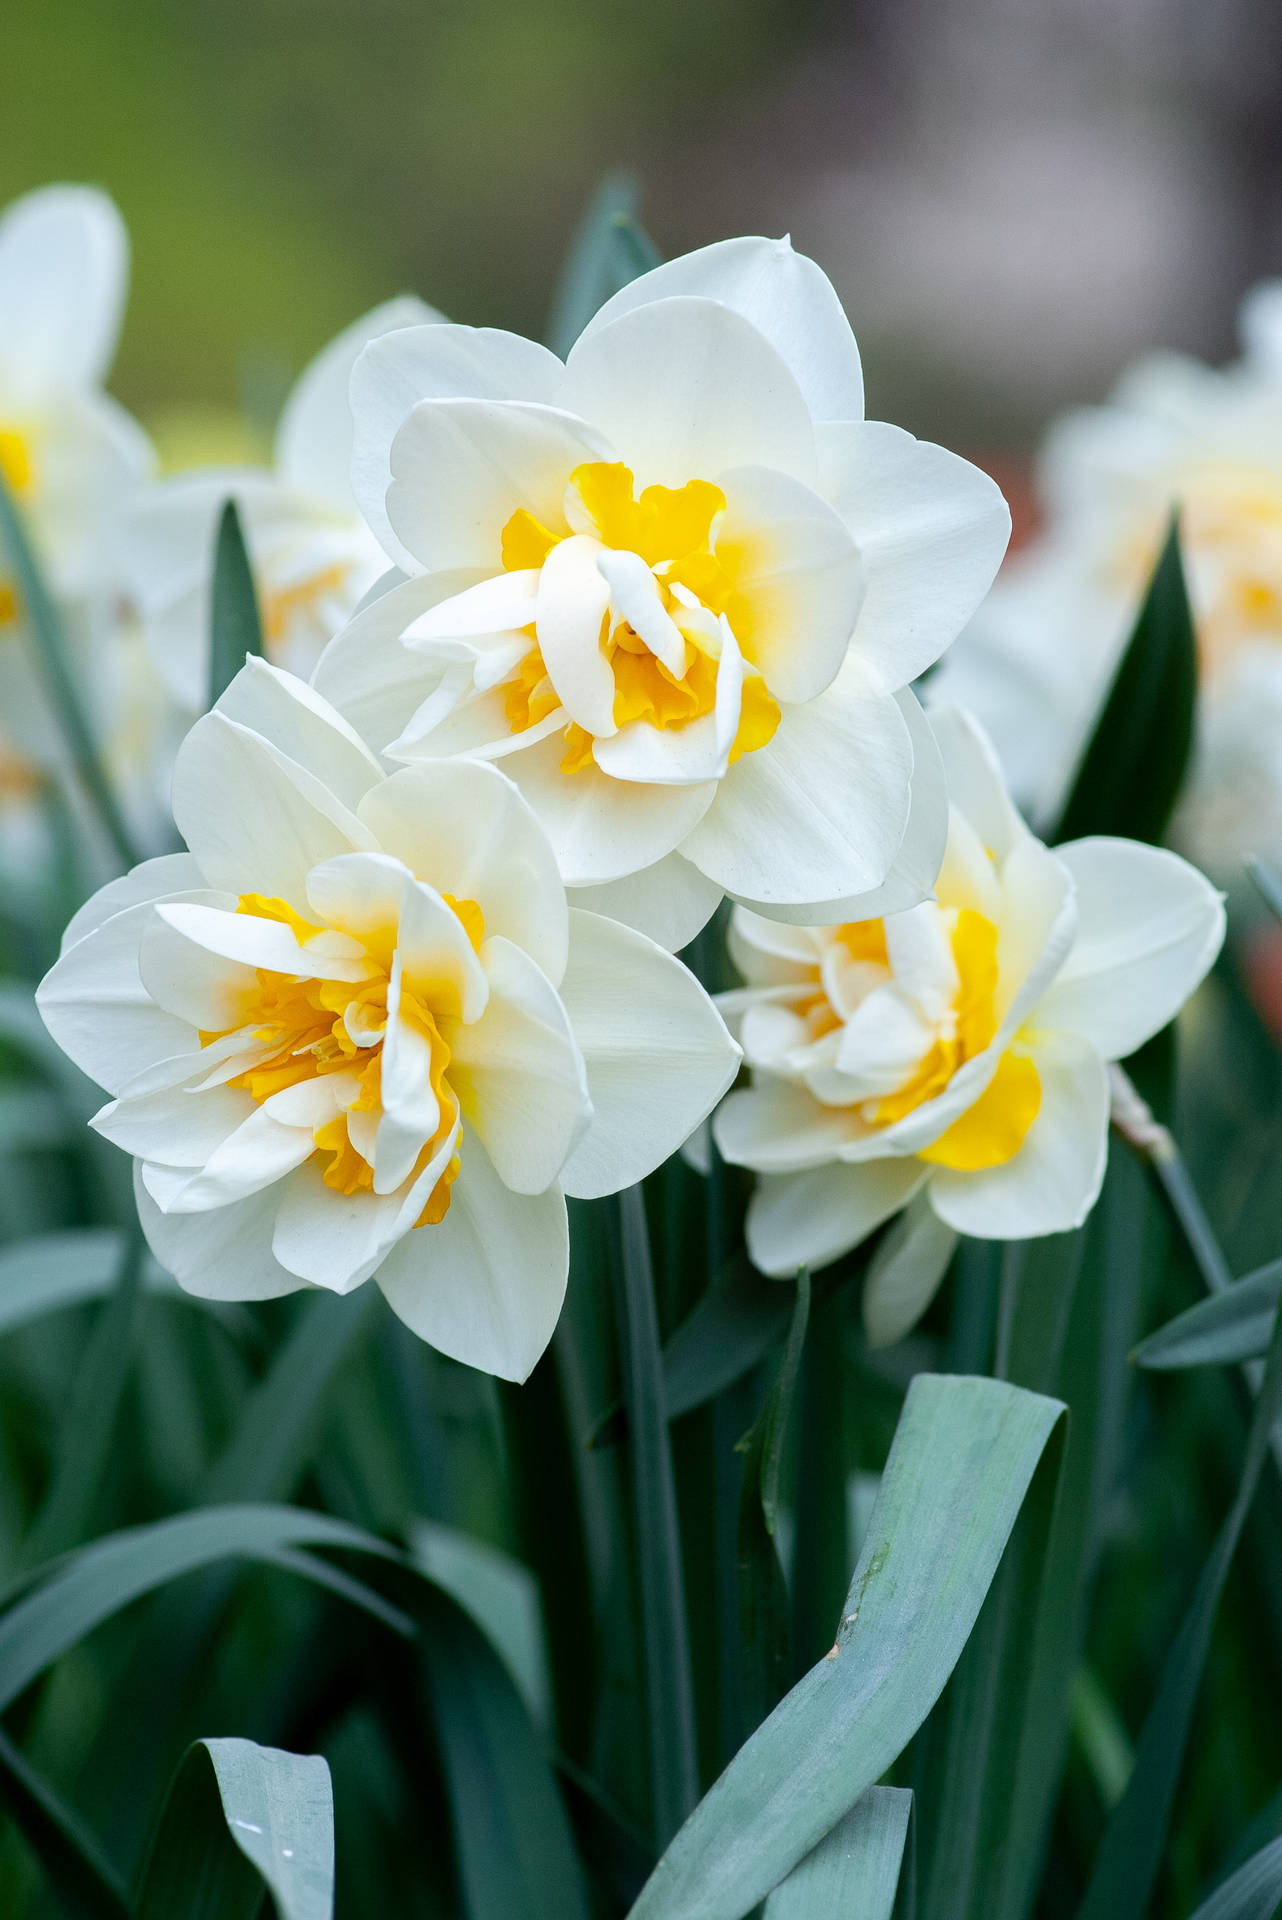 Vibrant Daffodil Blooming In Spring Background